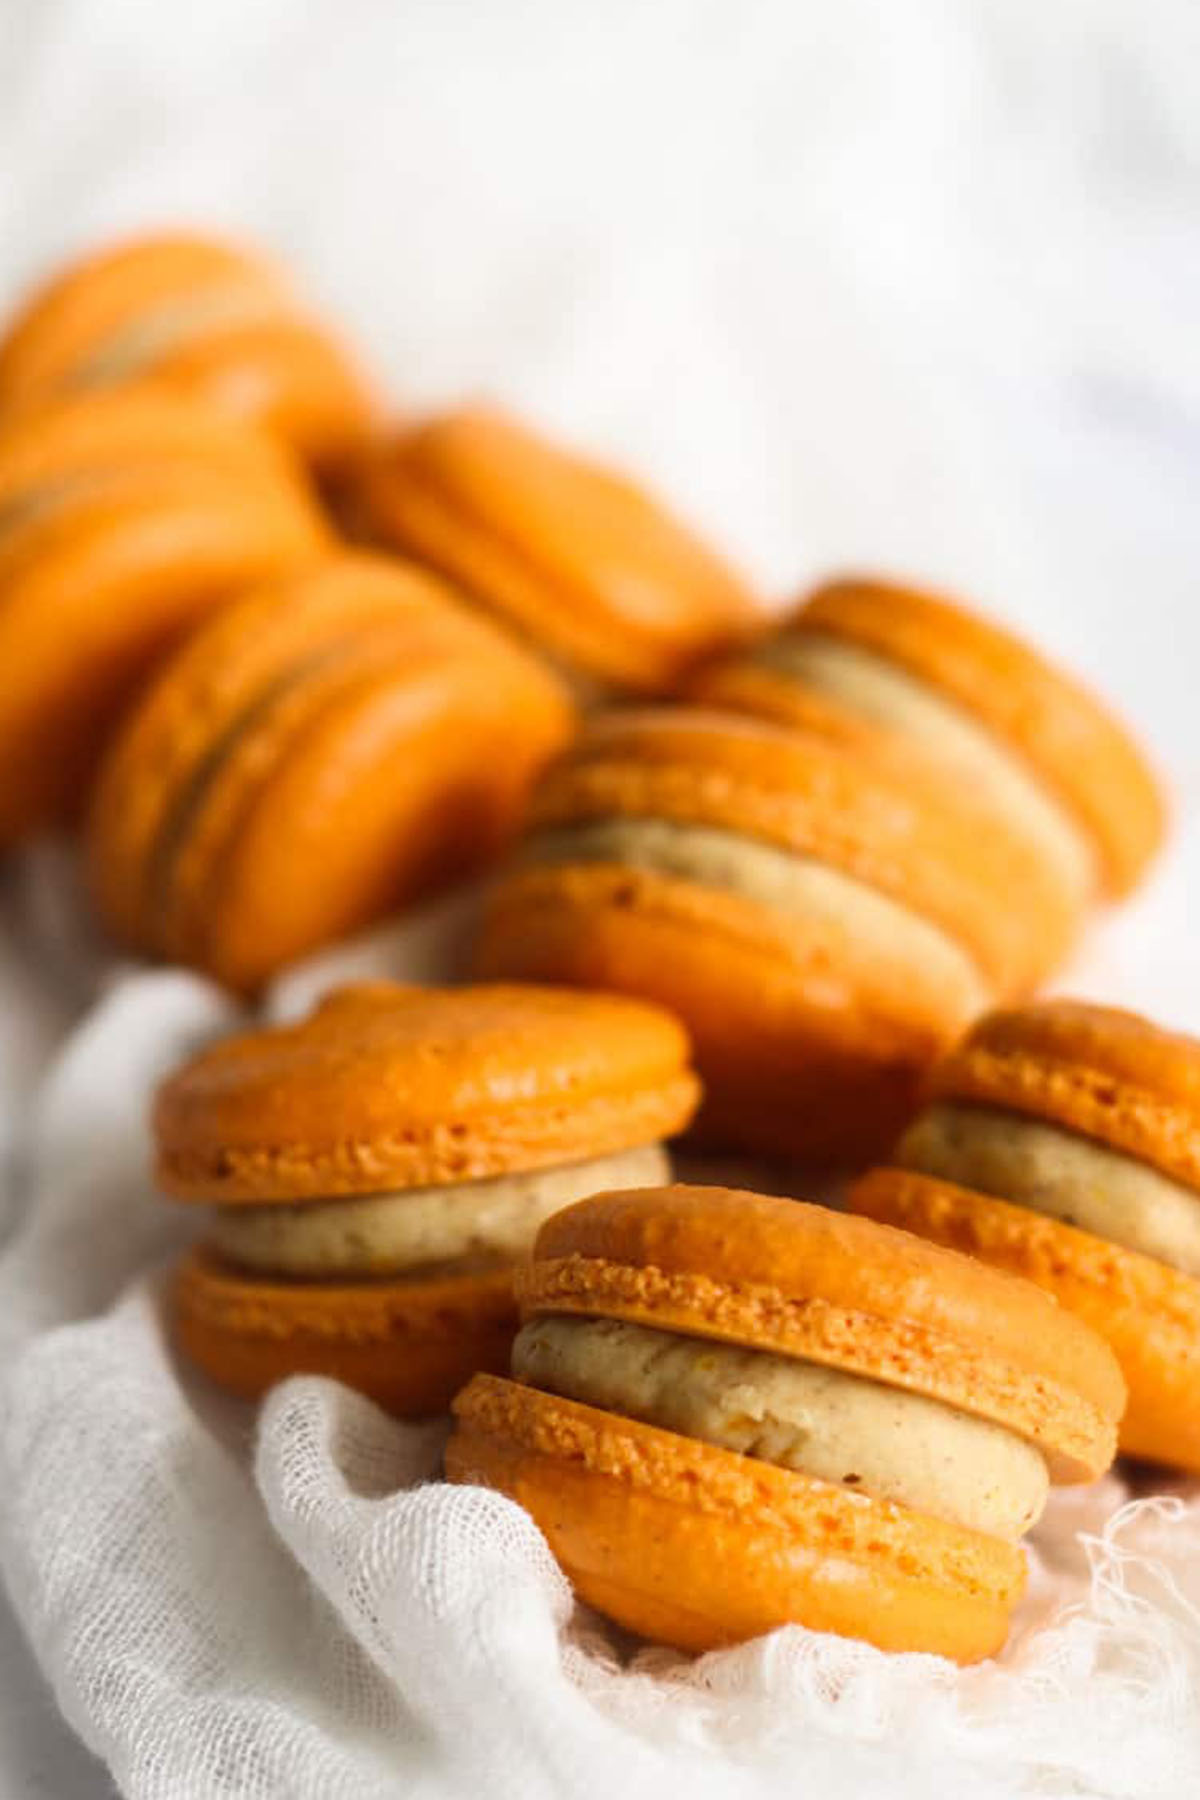 pumpkin spice flavored macarons with orange shells.